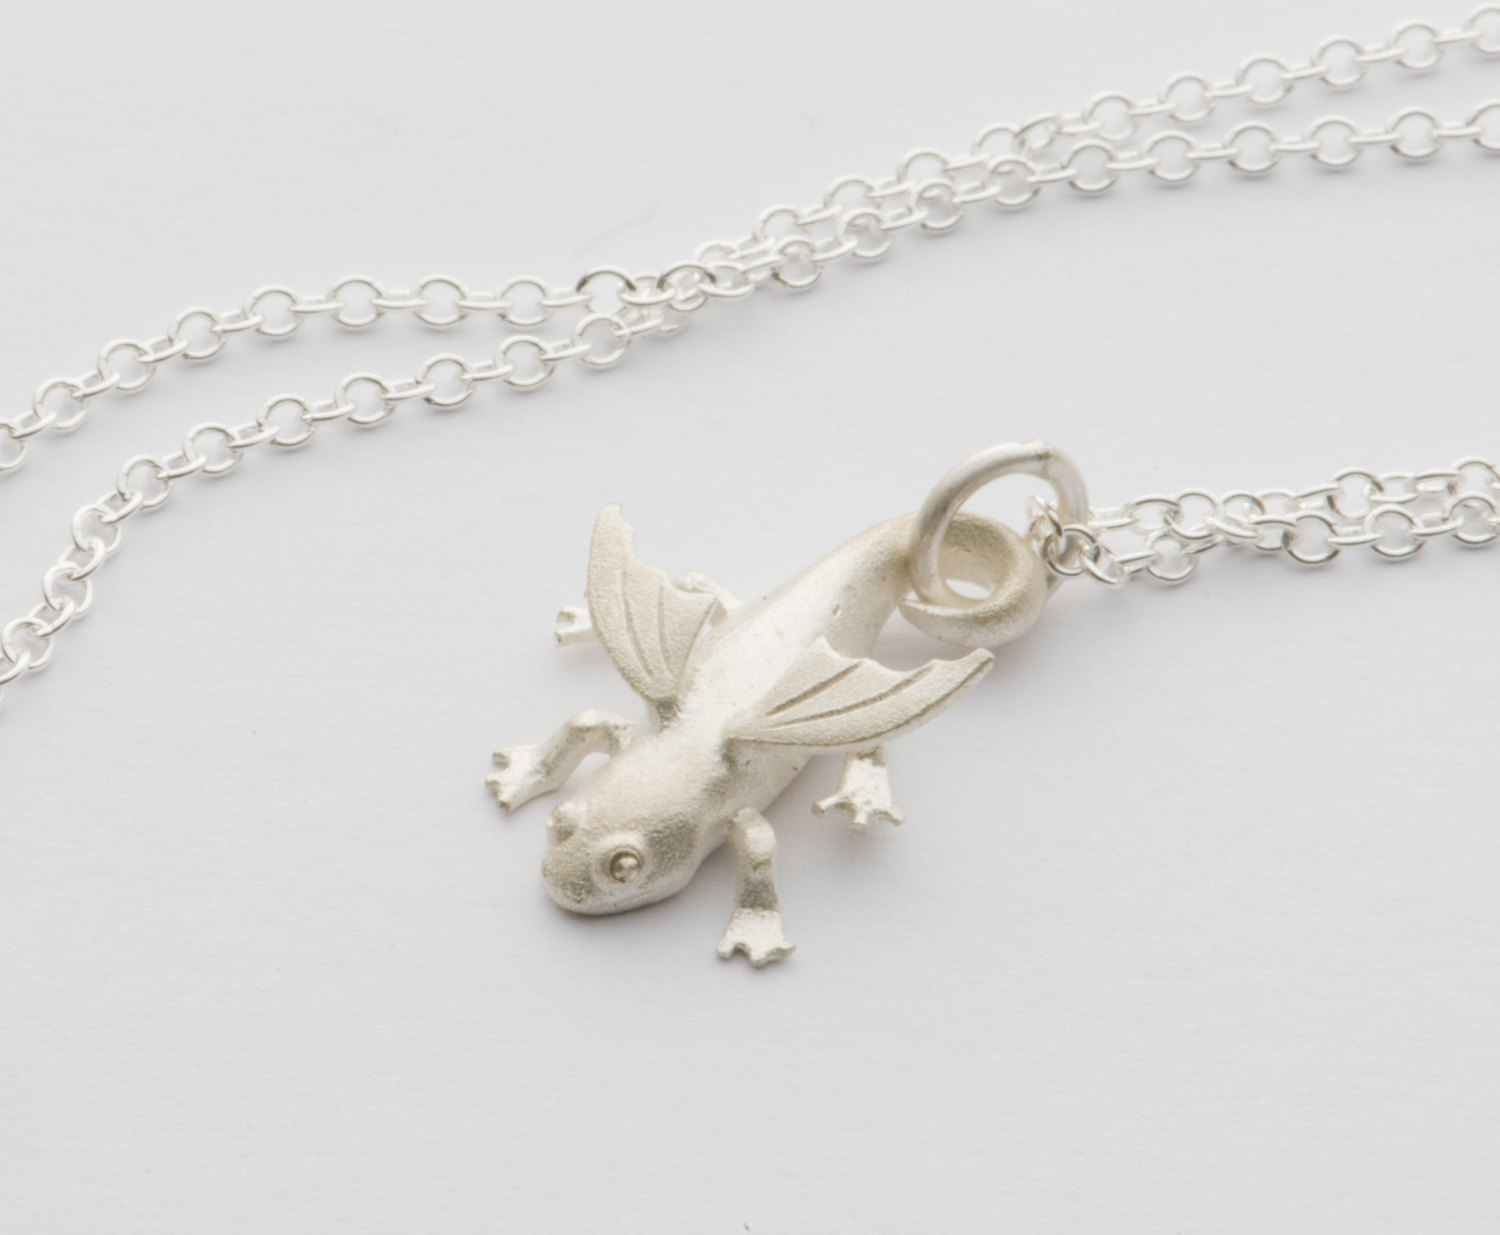 solid silver salamander charm on necklace